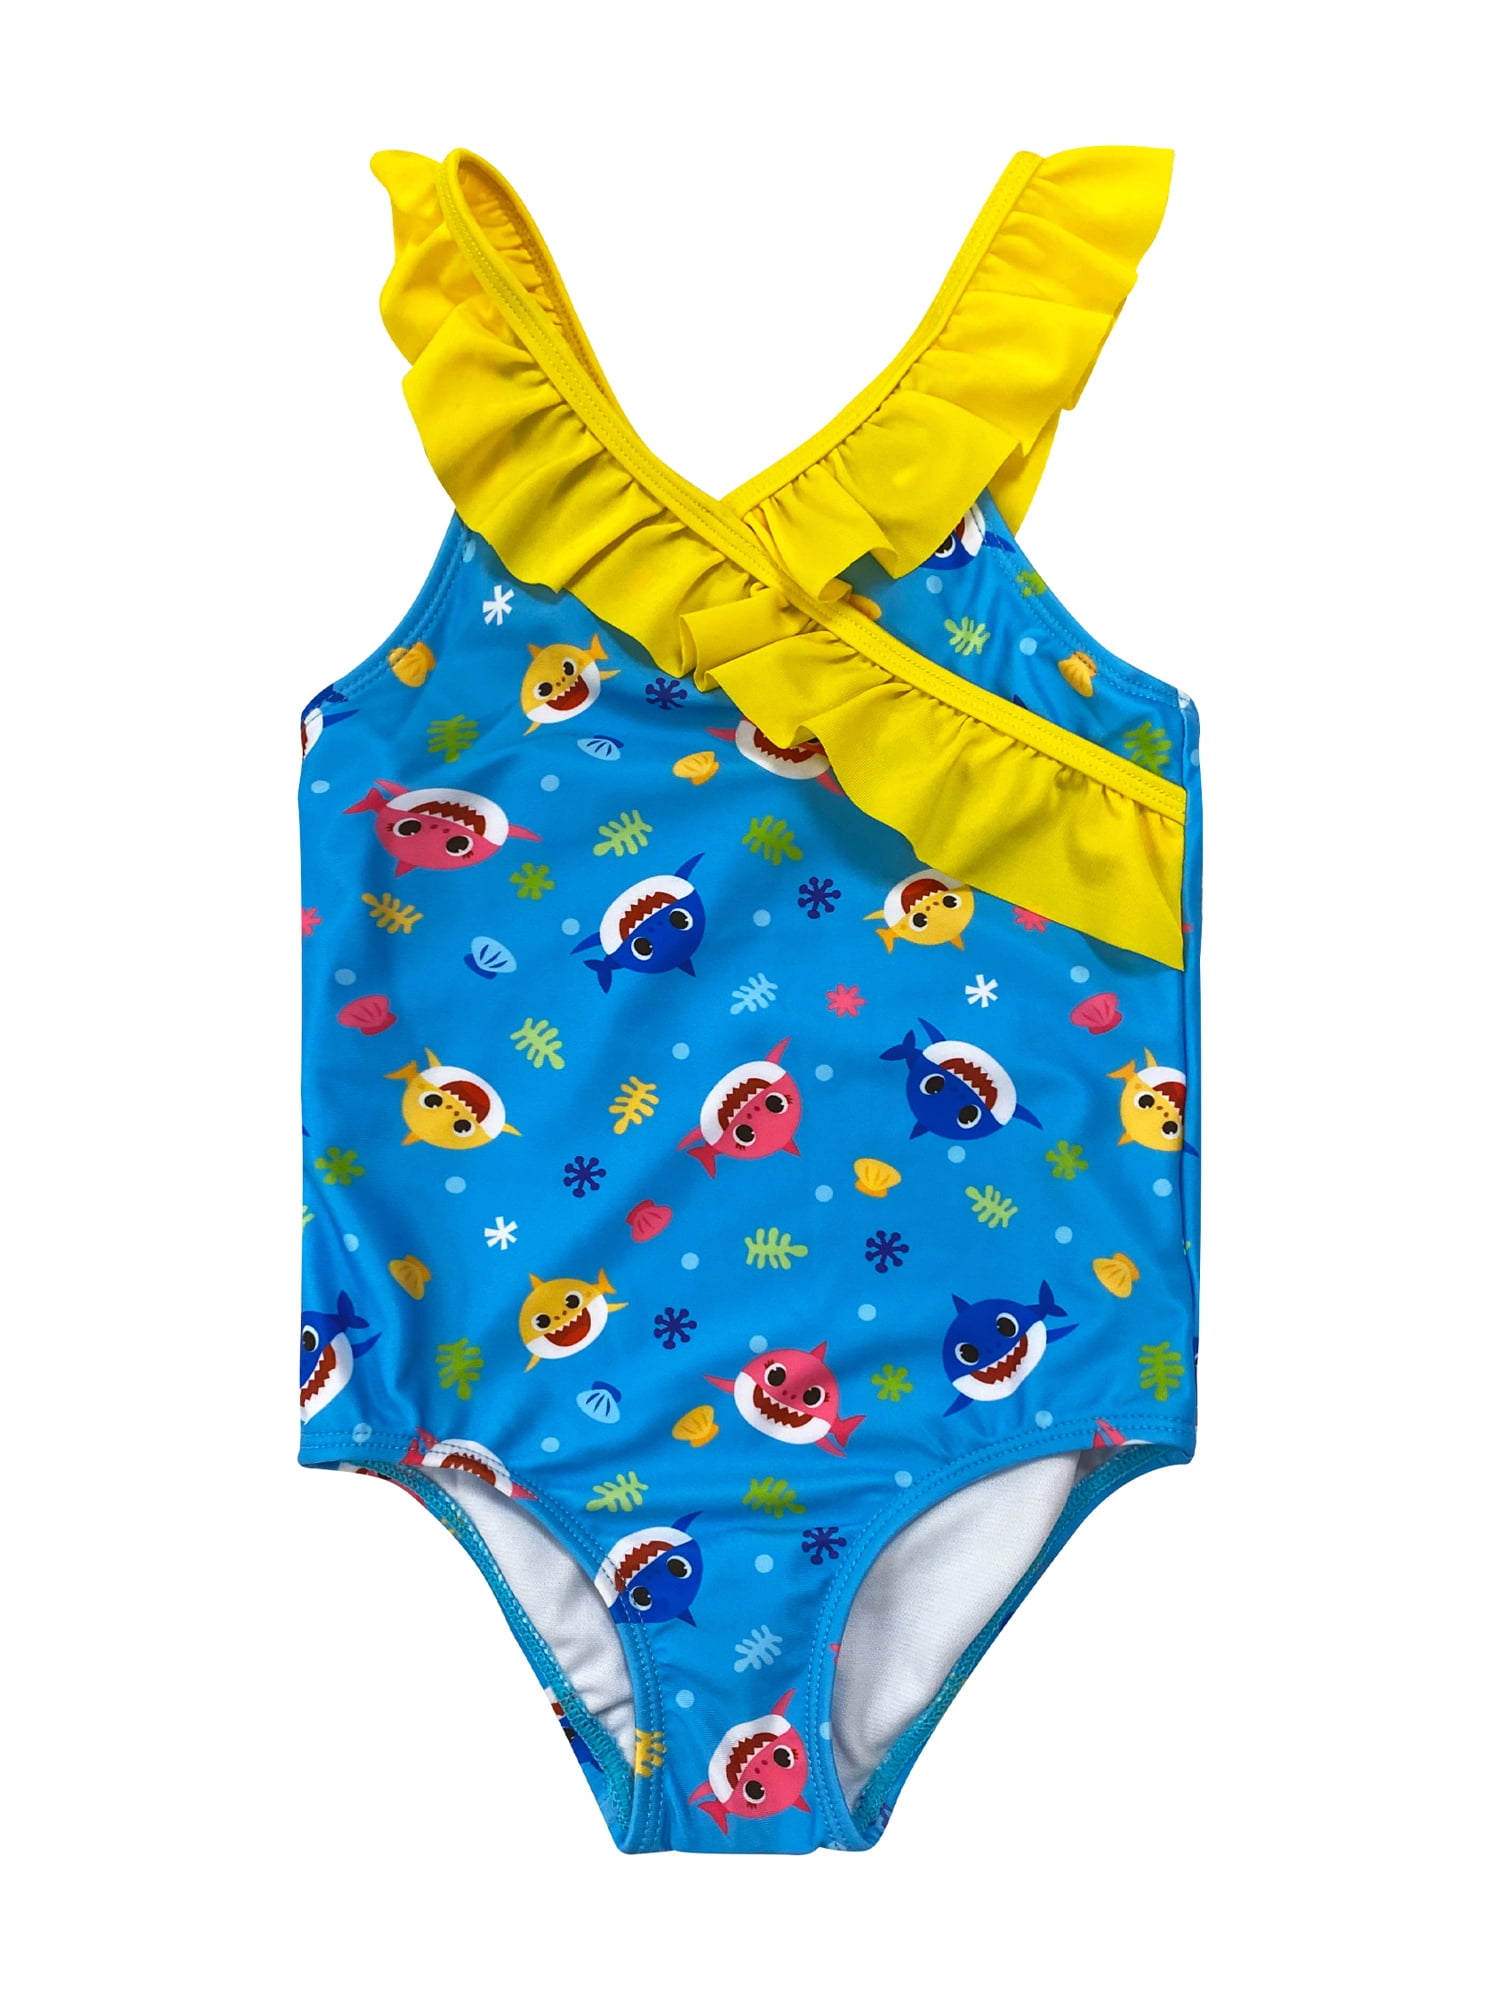 NWT Official Pinkfong Baby Shark One Piece Swimsuit 12 Months 1st Birthday Gift 